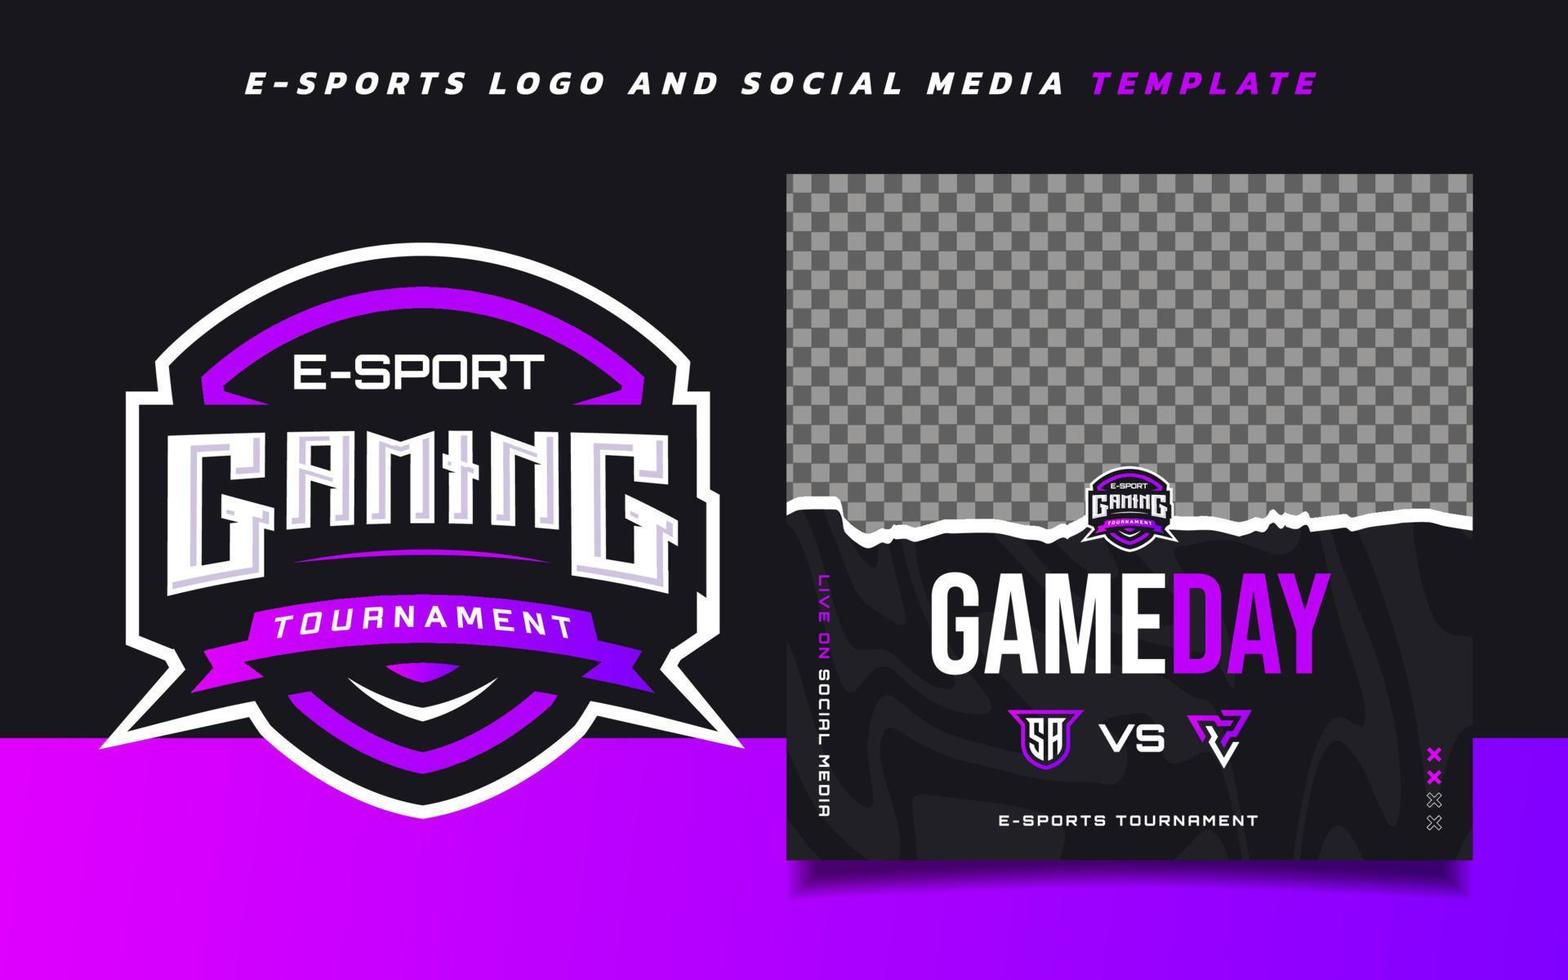 Game Day E-sports Gaming Banner Template for social media with Gaming Tournament Logo vector